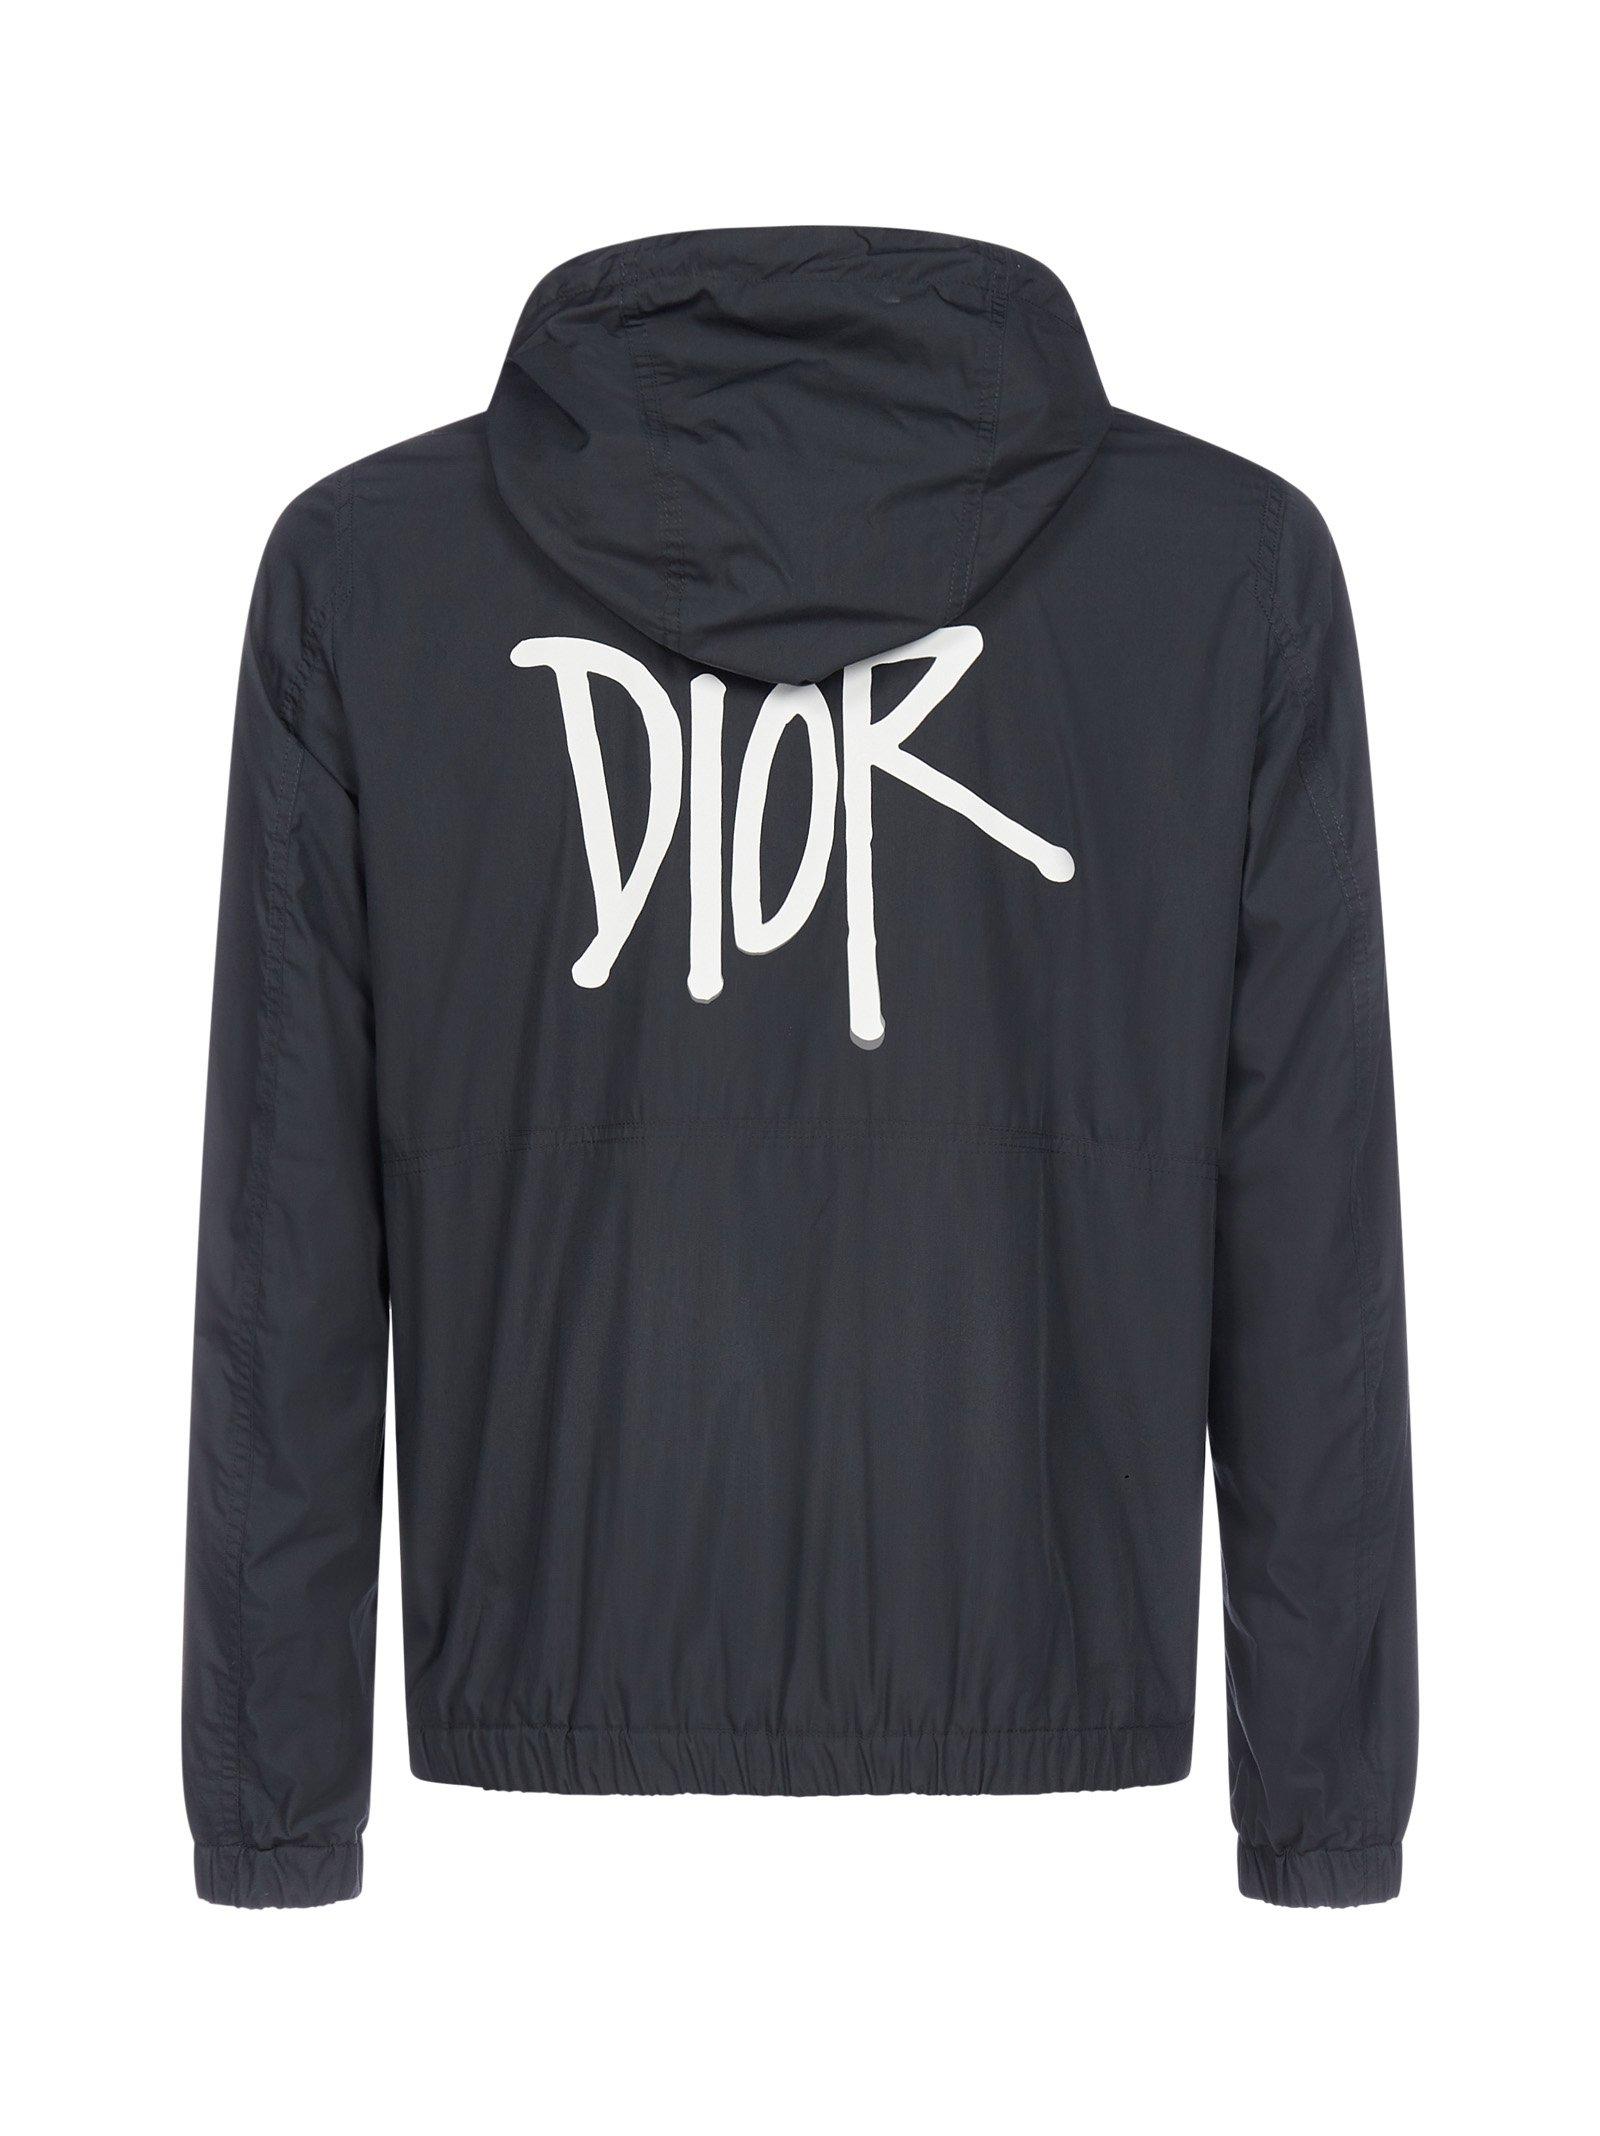 Dior X Shawn Stussy Hooded Jacket in Black for Men | Lyst